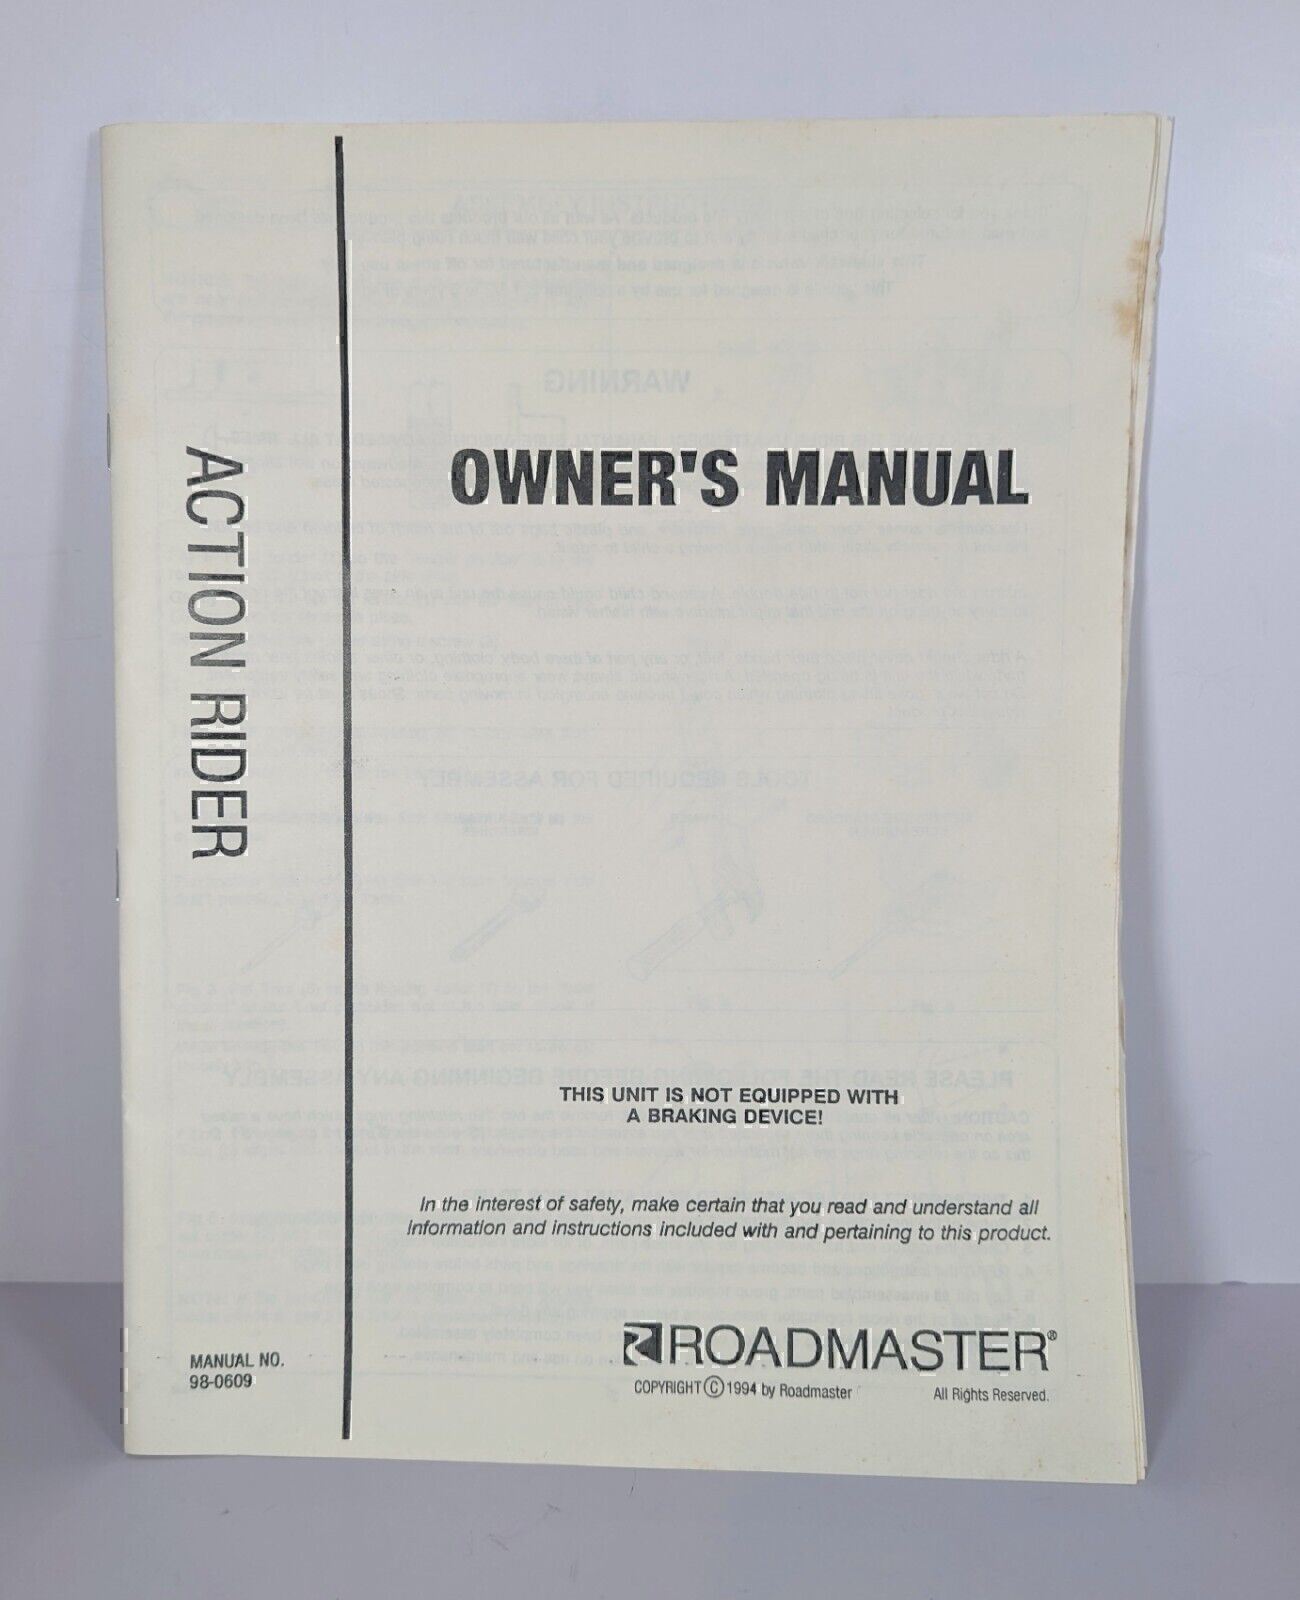 1994 Roadmaster Action Rider Tricycle Owner\'s Manual  Instruction Book  98-0609